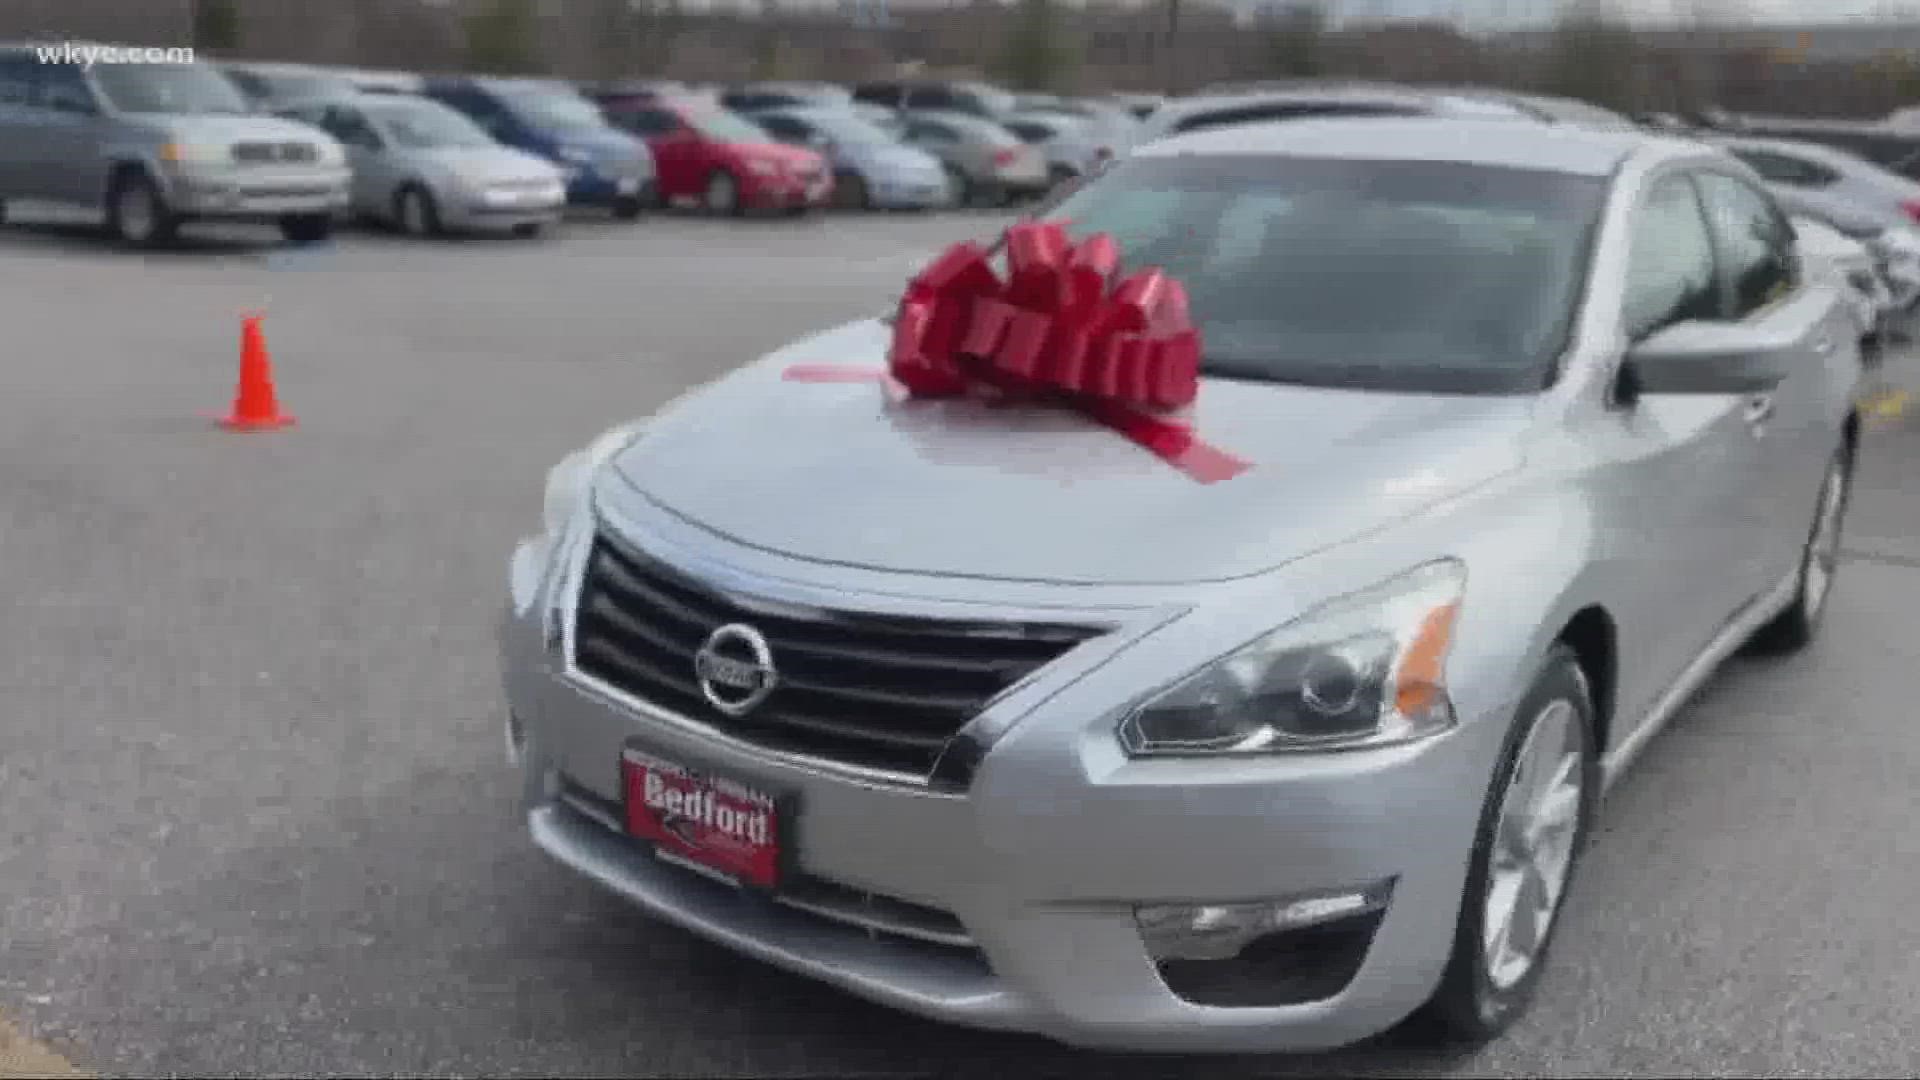 A faithful Northeast Ohio couple was given a special surprise courtesy of Dr. R.A. Vernon and The Word Church in partnership with Bedford Nissan.